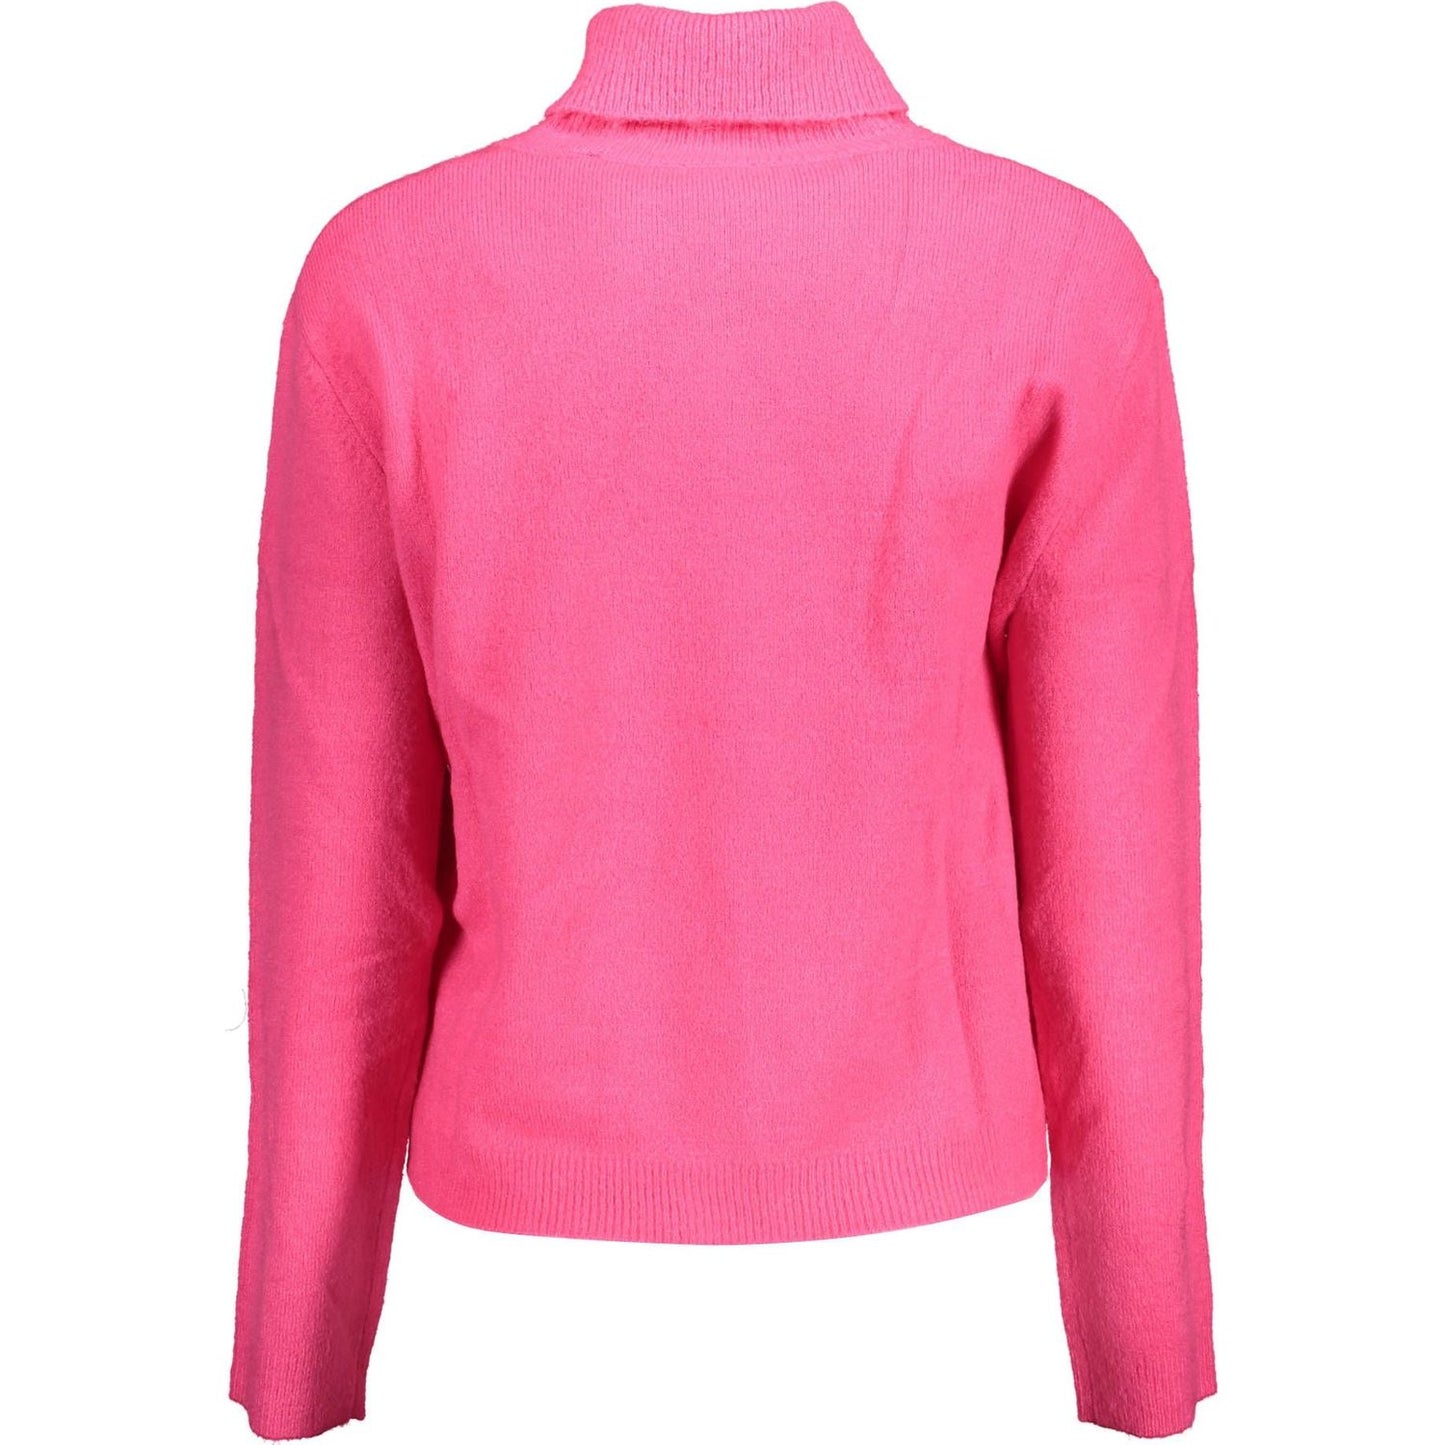 U.S. POLO ASSN. Chic Turtleneck Sweater with Elegant Embroidery chic-turtleneck-sweater-with-elegant-embroidery